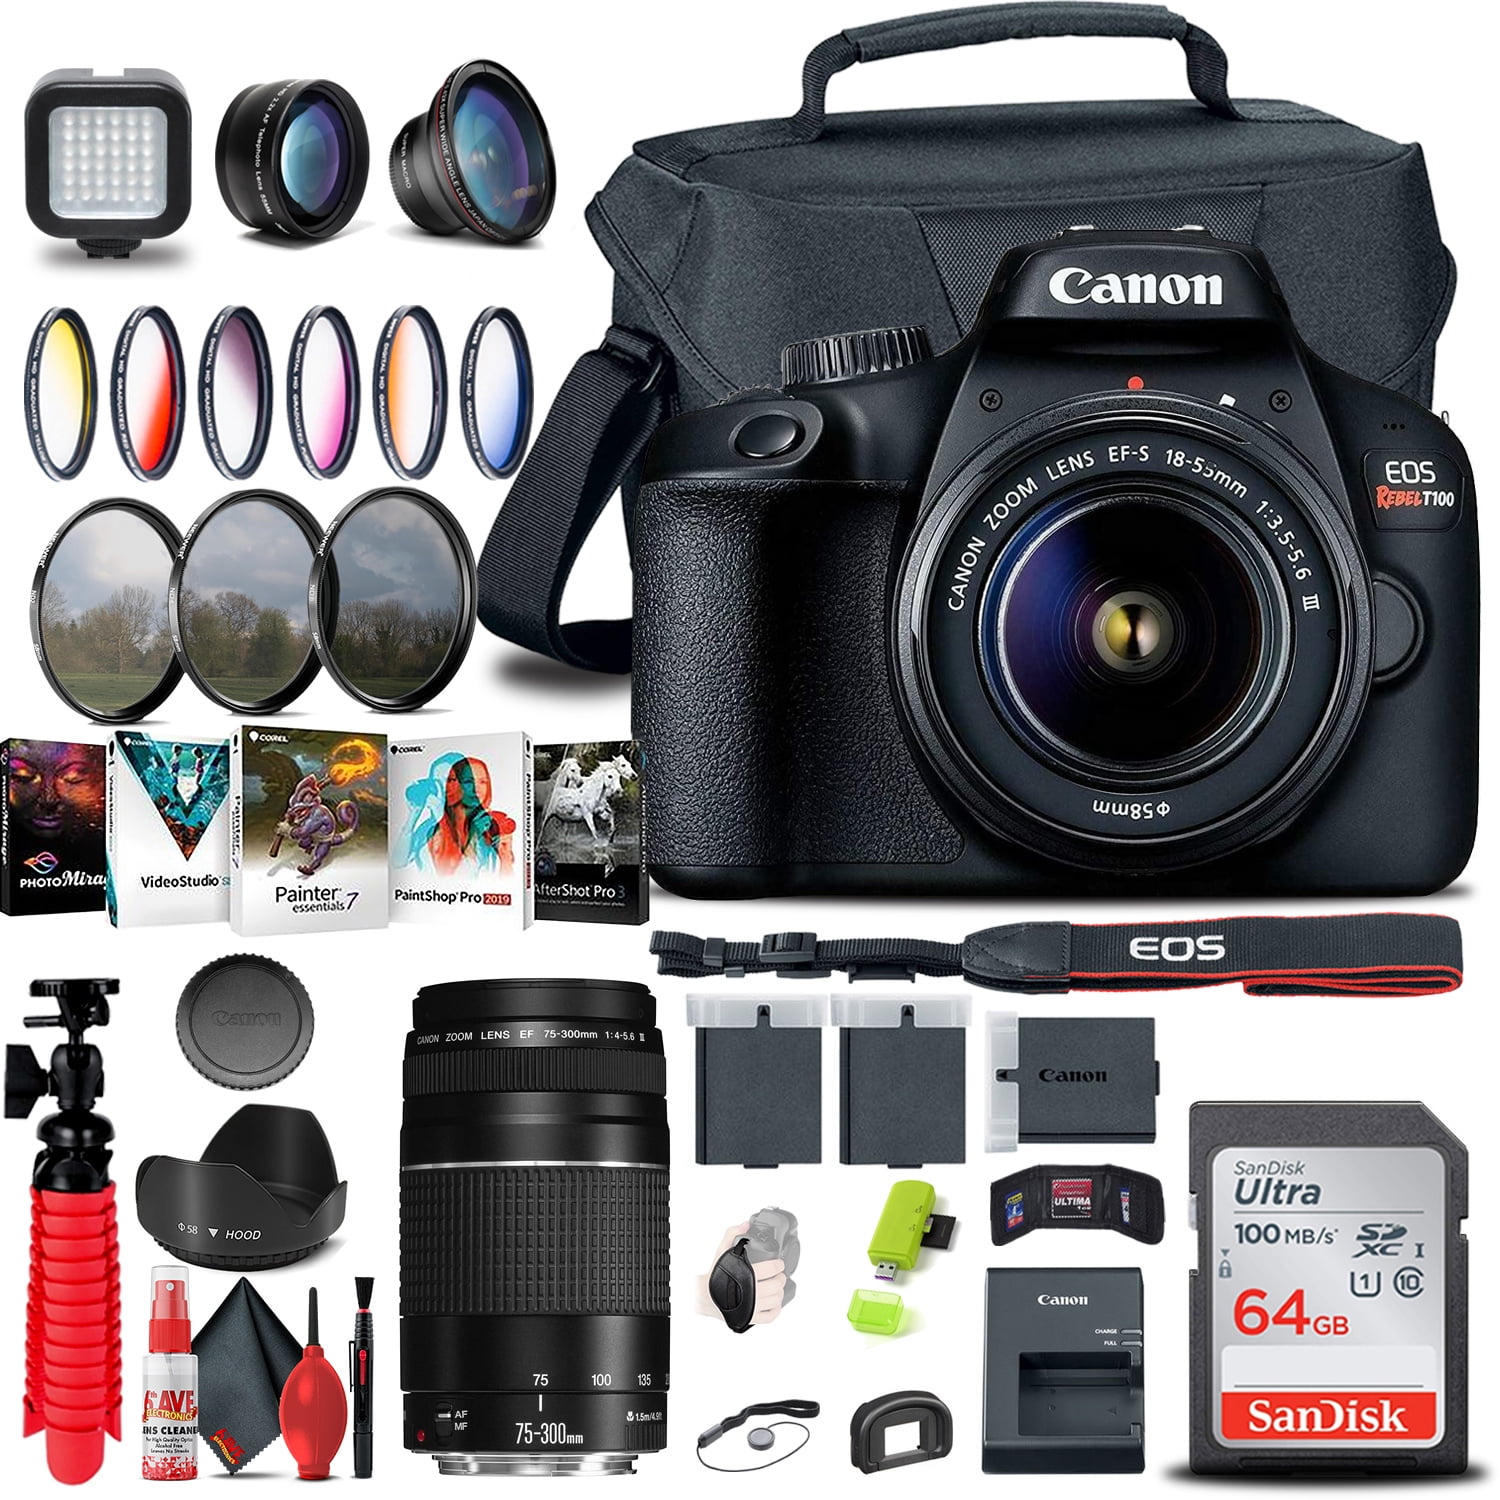 Canon EOS Rebel T100 / 4000D DSLR Camera with 18-55mm Lens, SanDisk 128GB  Memory, Tripod, Backpack and ZeeTech Bundle 